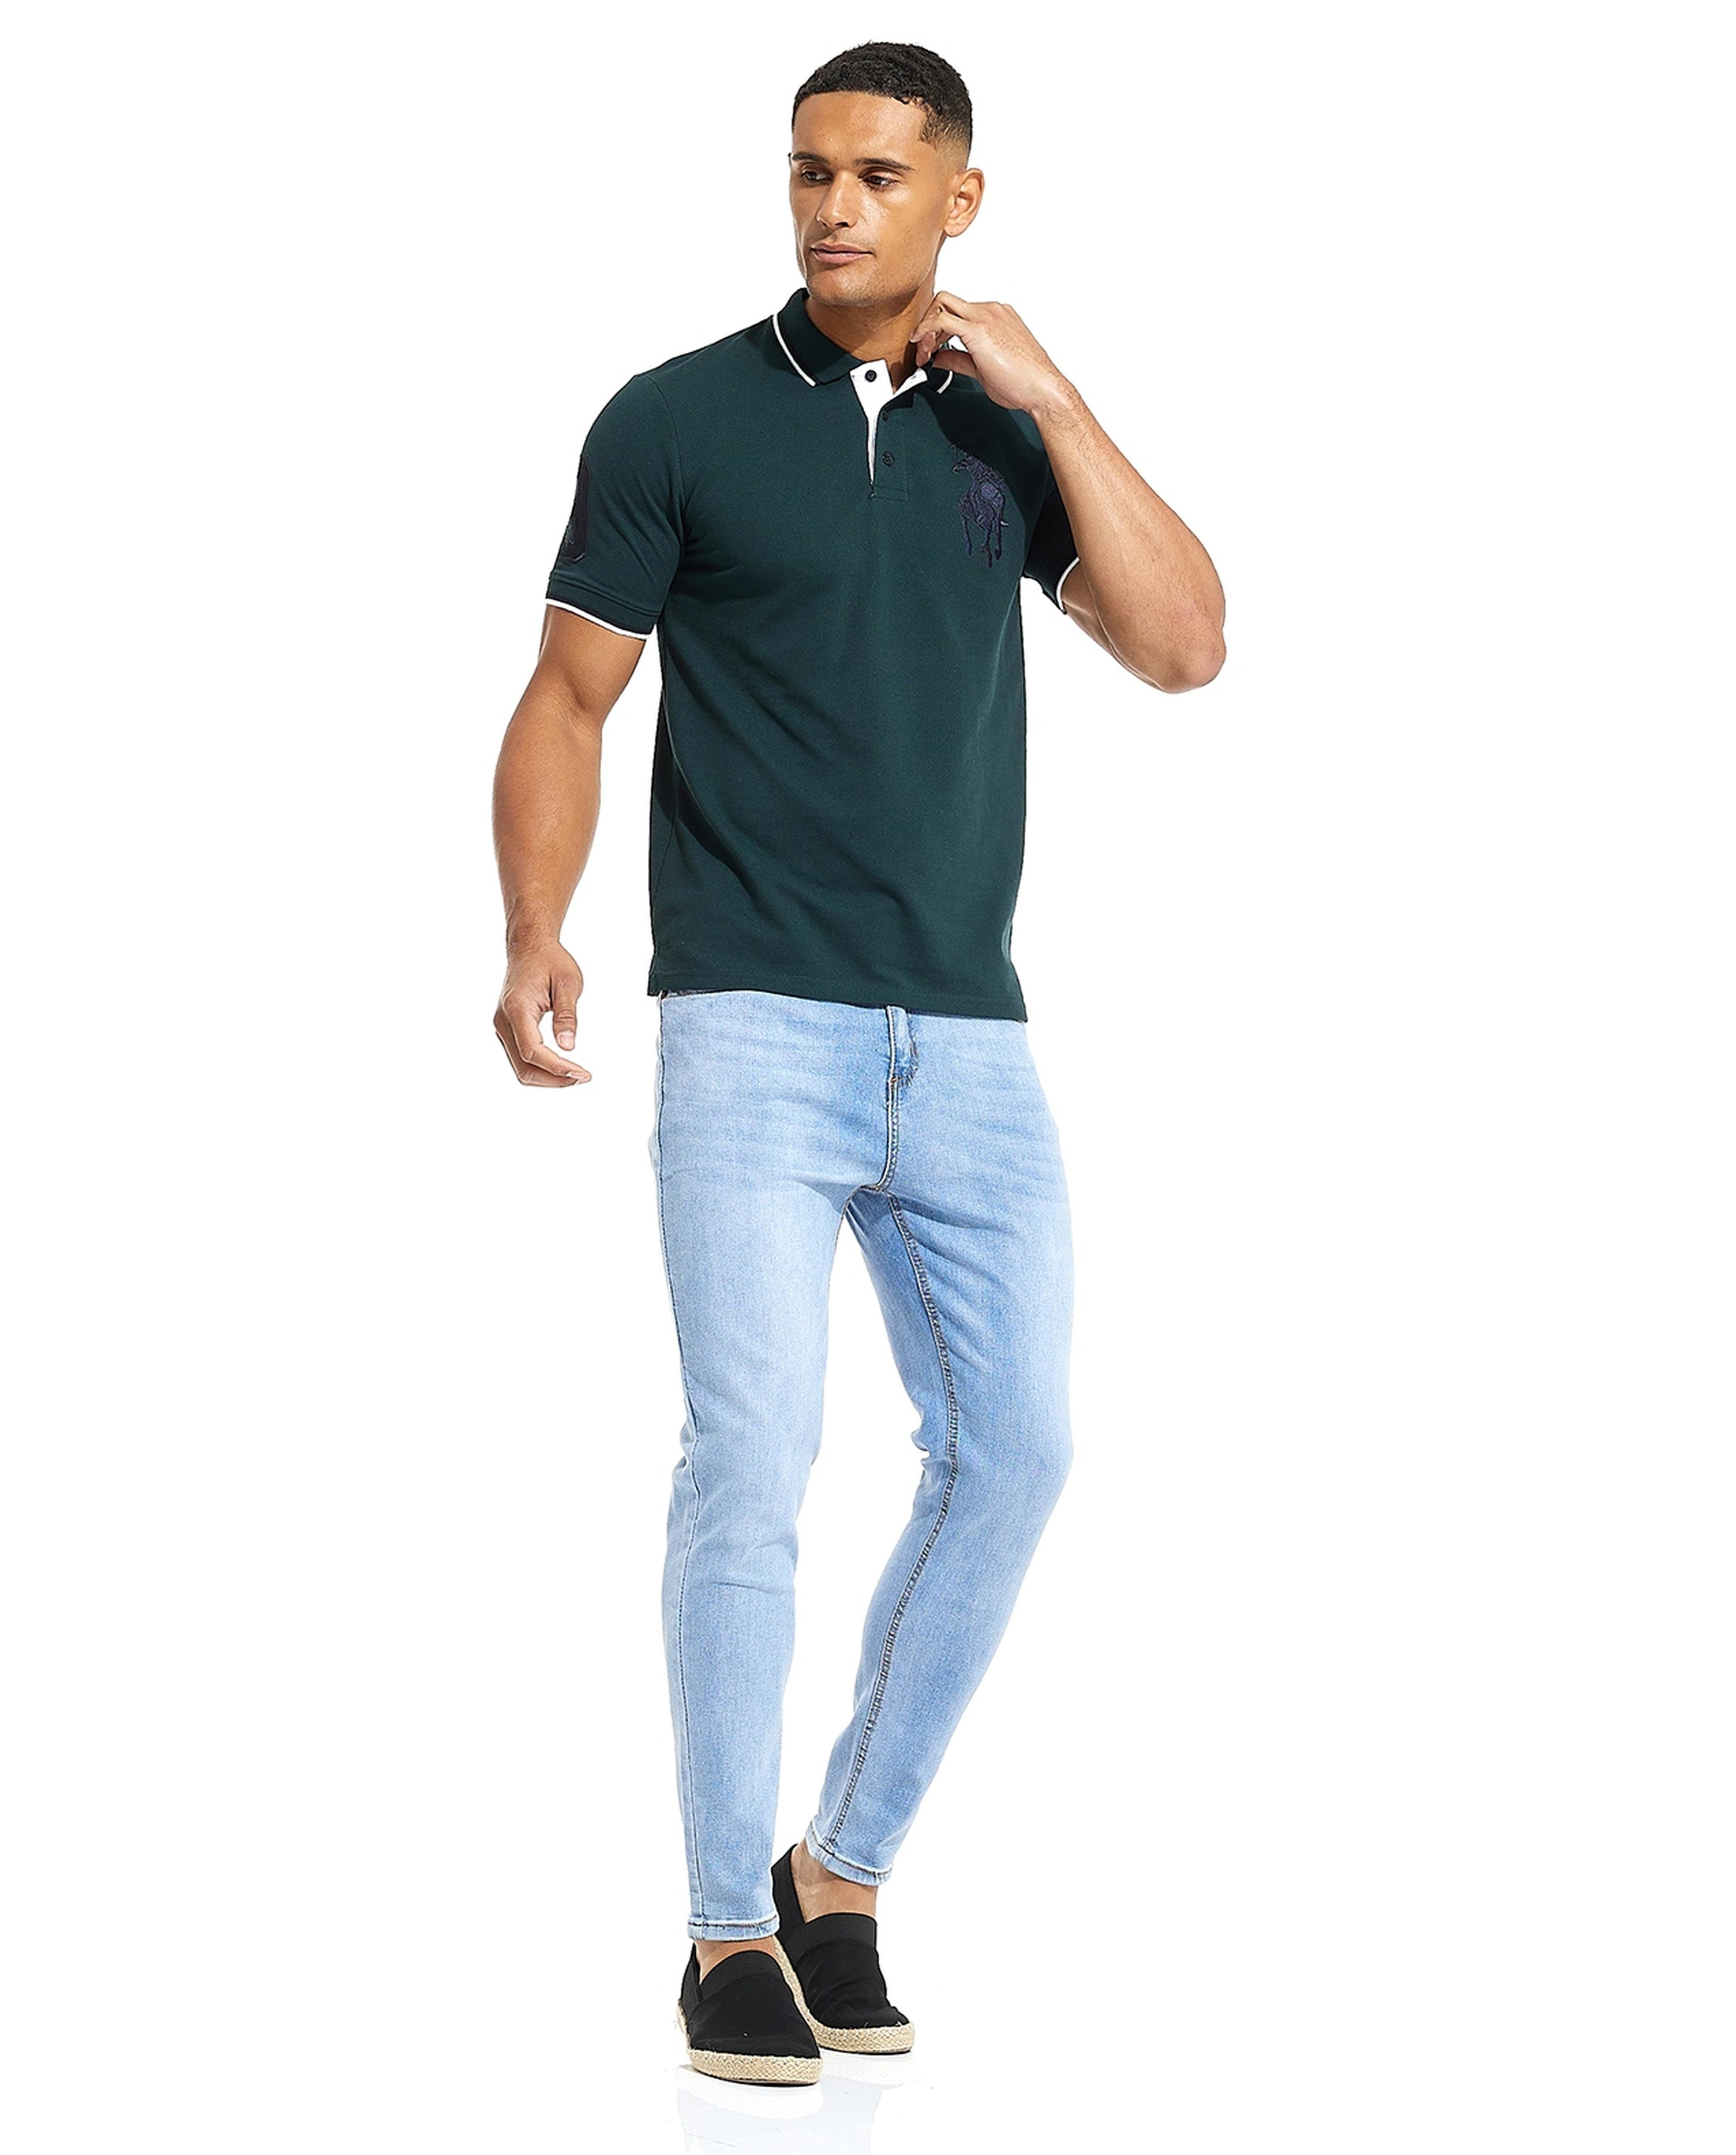 Logo Embroidered Polo T-Shirt with Short Sleeves